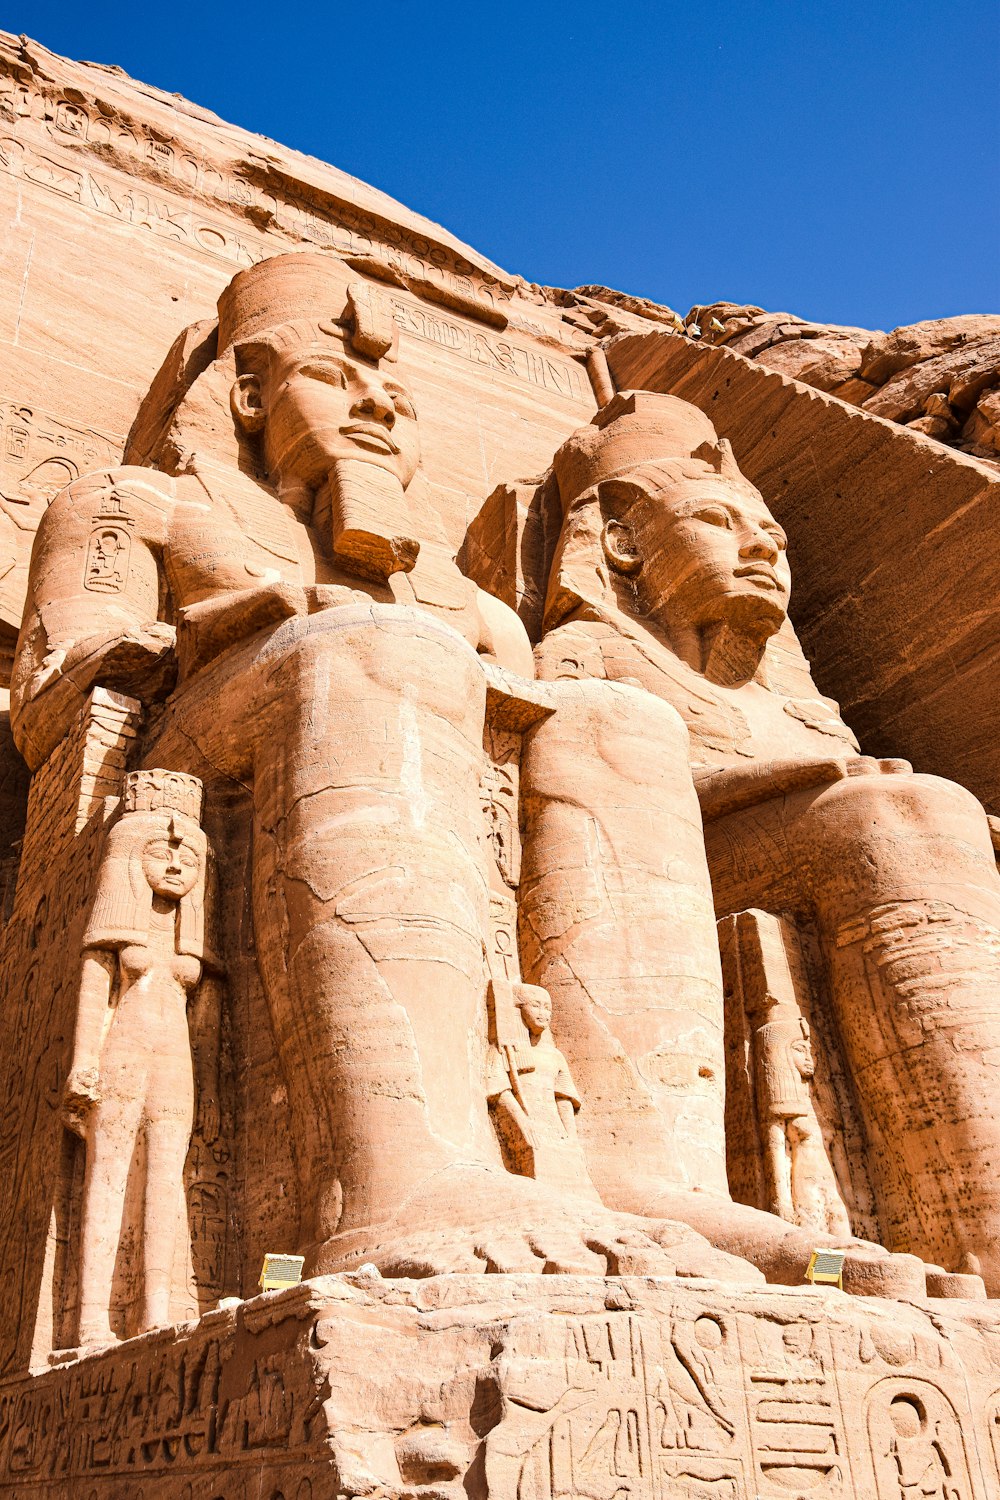 the statues of pharaohs and queens of egypt